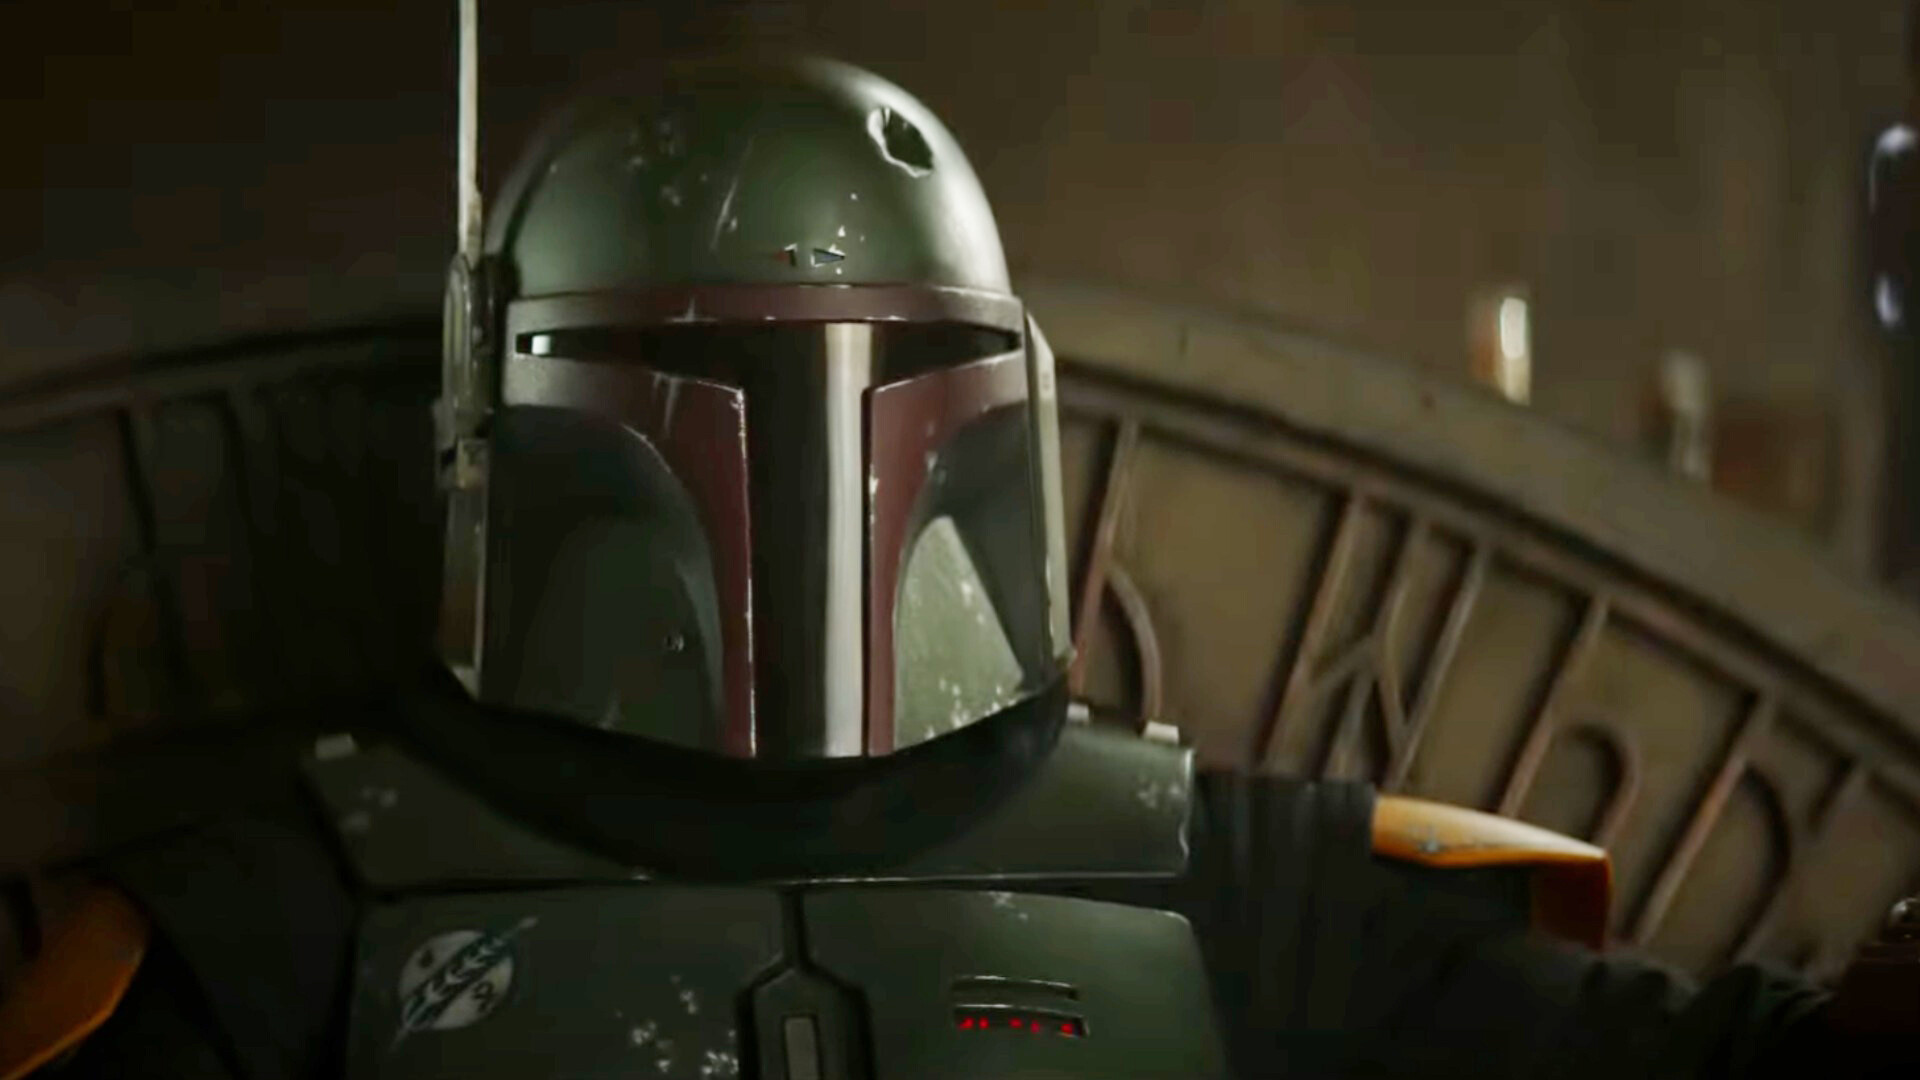 The Book of Boba Fett: A spin-off of the acclaimed Star Wars show The Mandalorian. 1920x1080 Full HD Wallpaper.